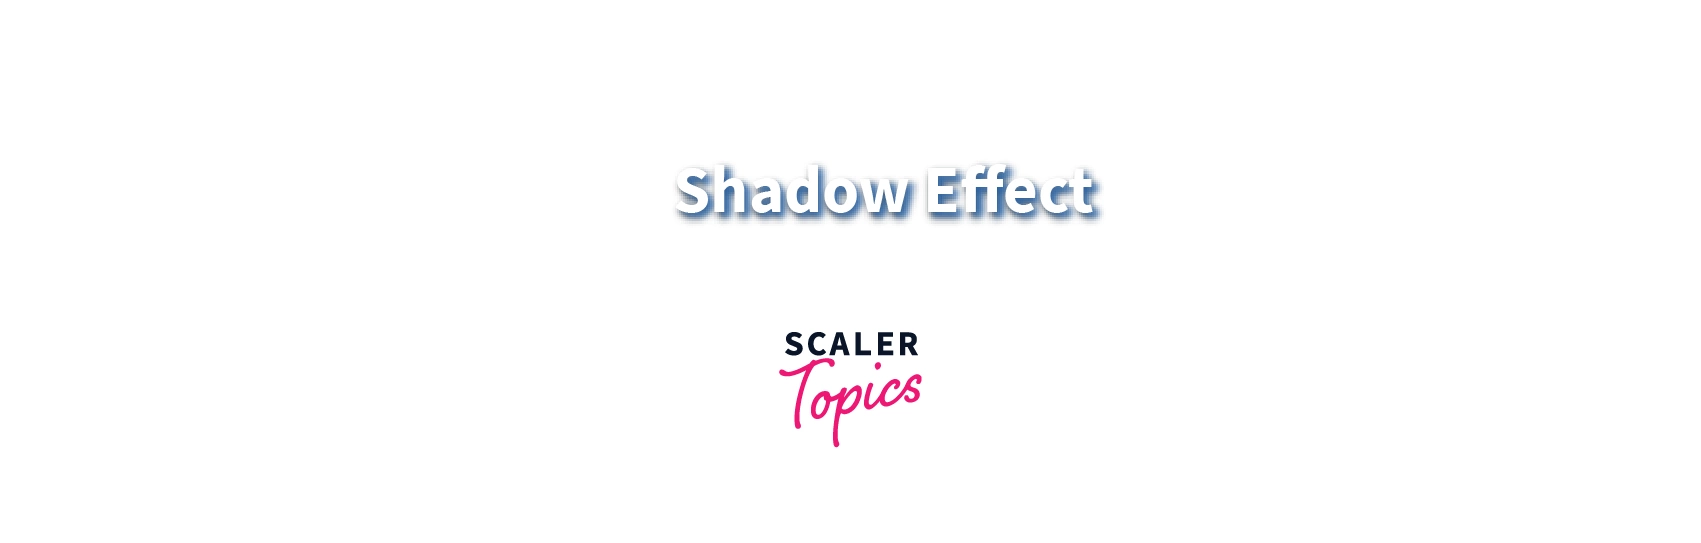 two shadow effects are specified separated by a comma